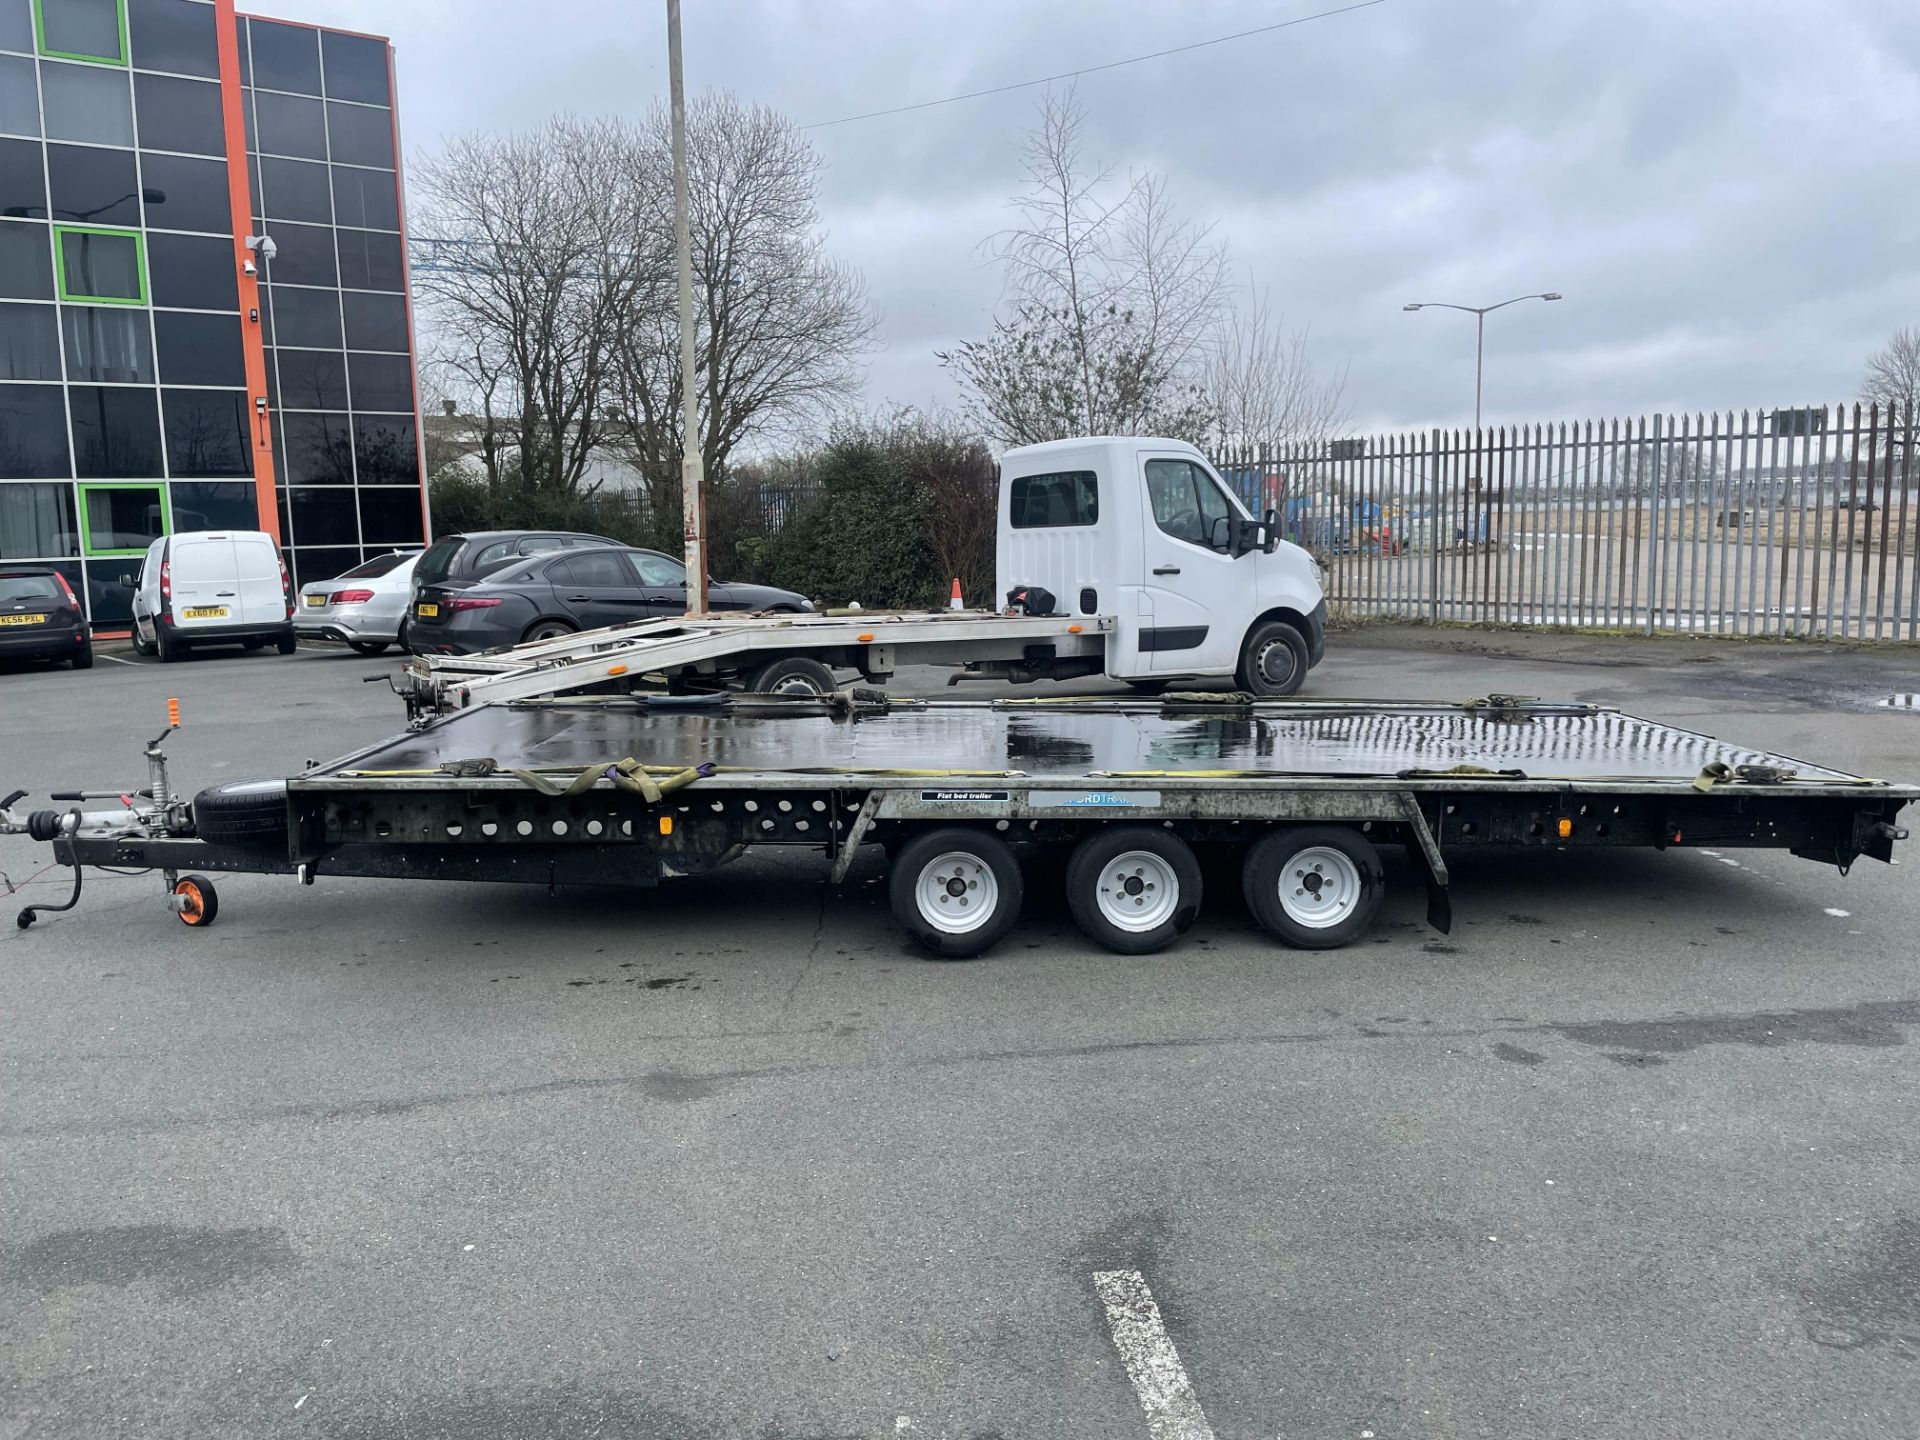 January 2021 Woodford 18 Ft Tri-Axle Hydraulic Tilt Flatbed Trailer c/w Ramps and Manual winch - Image 2 of 10